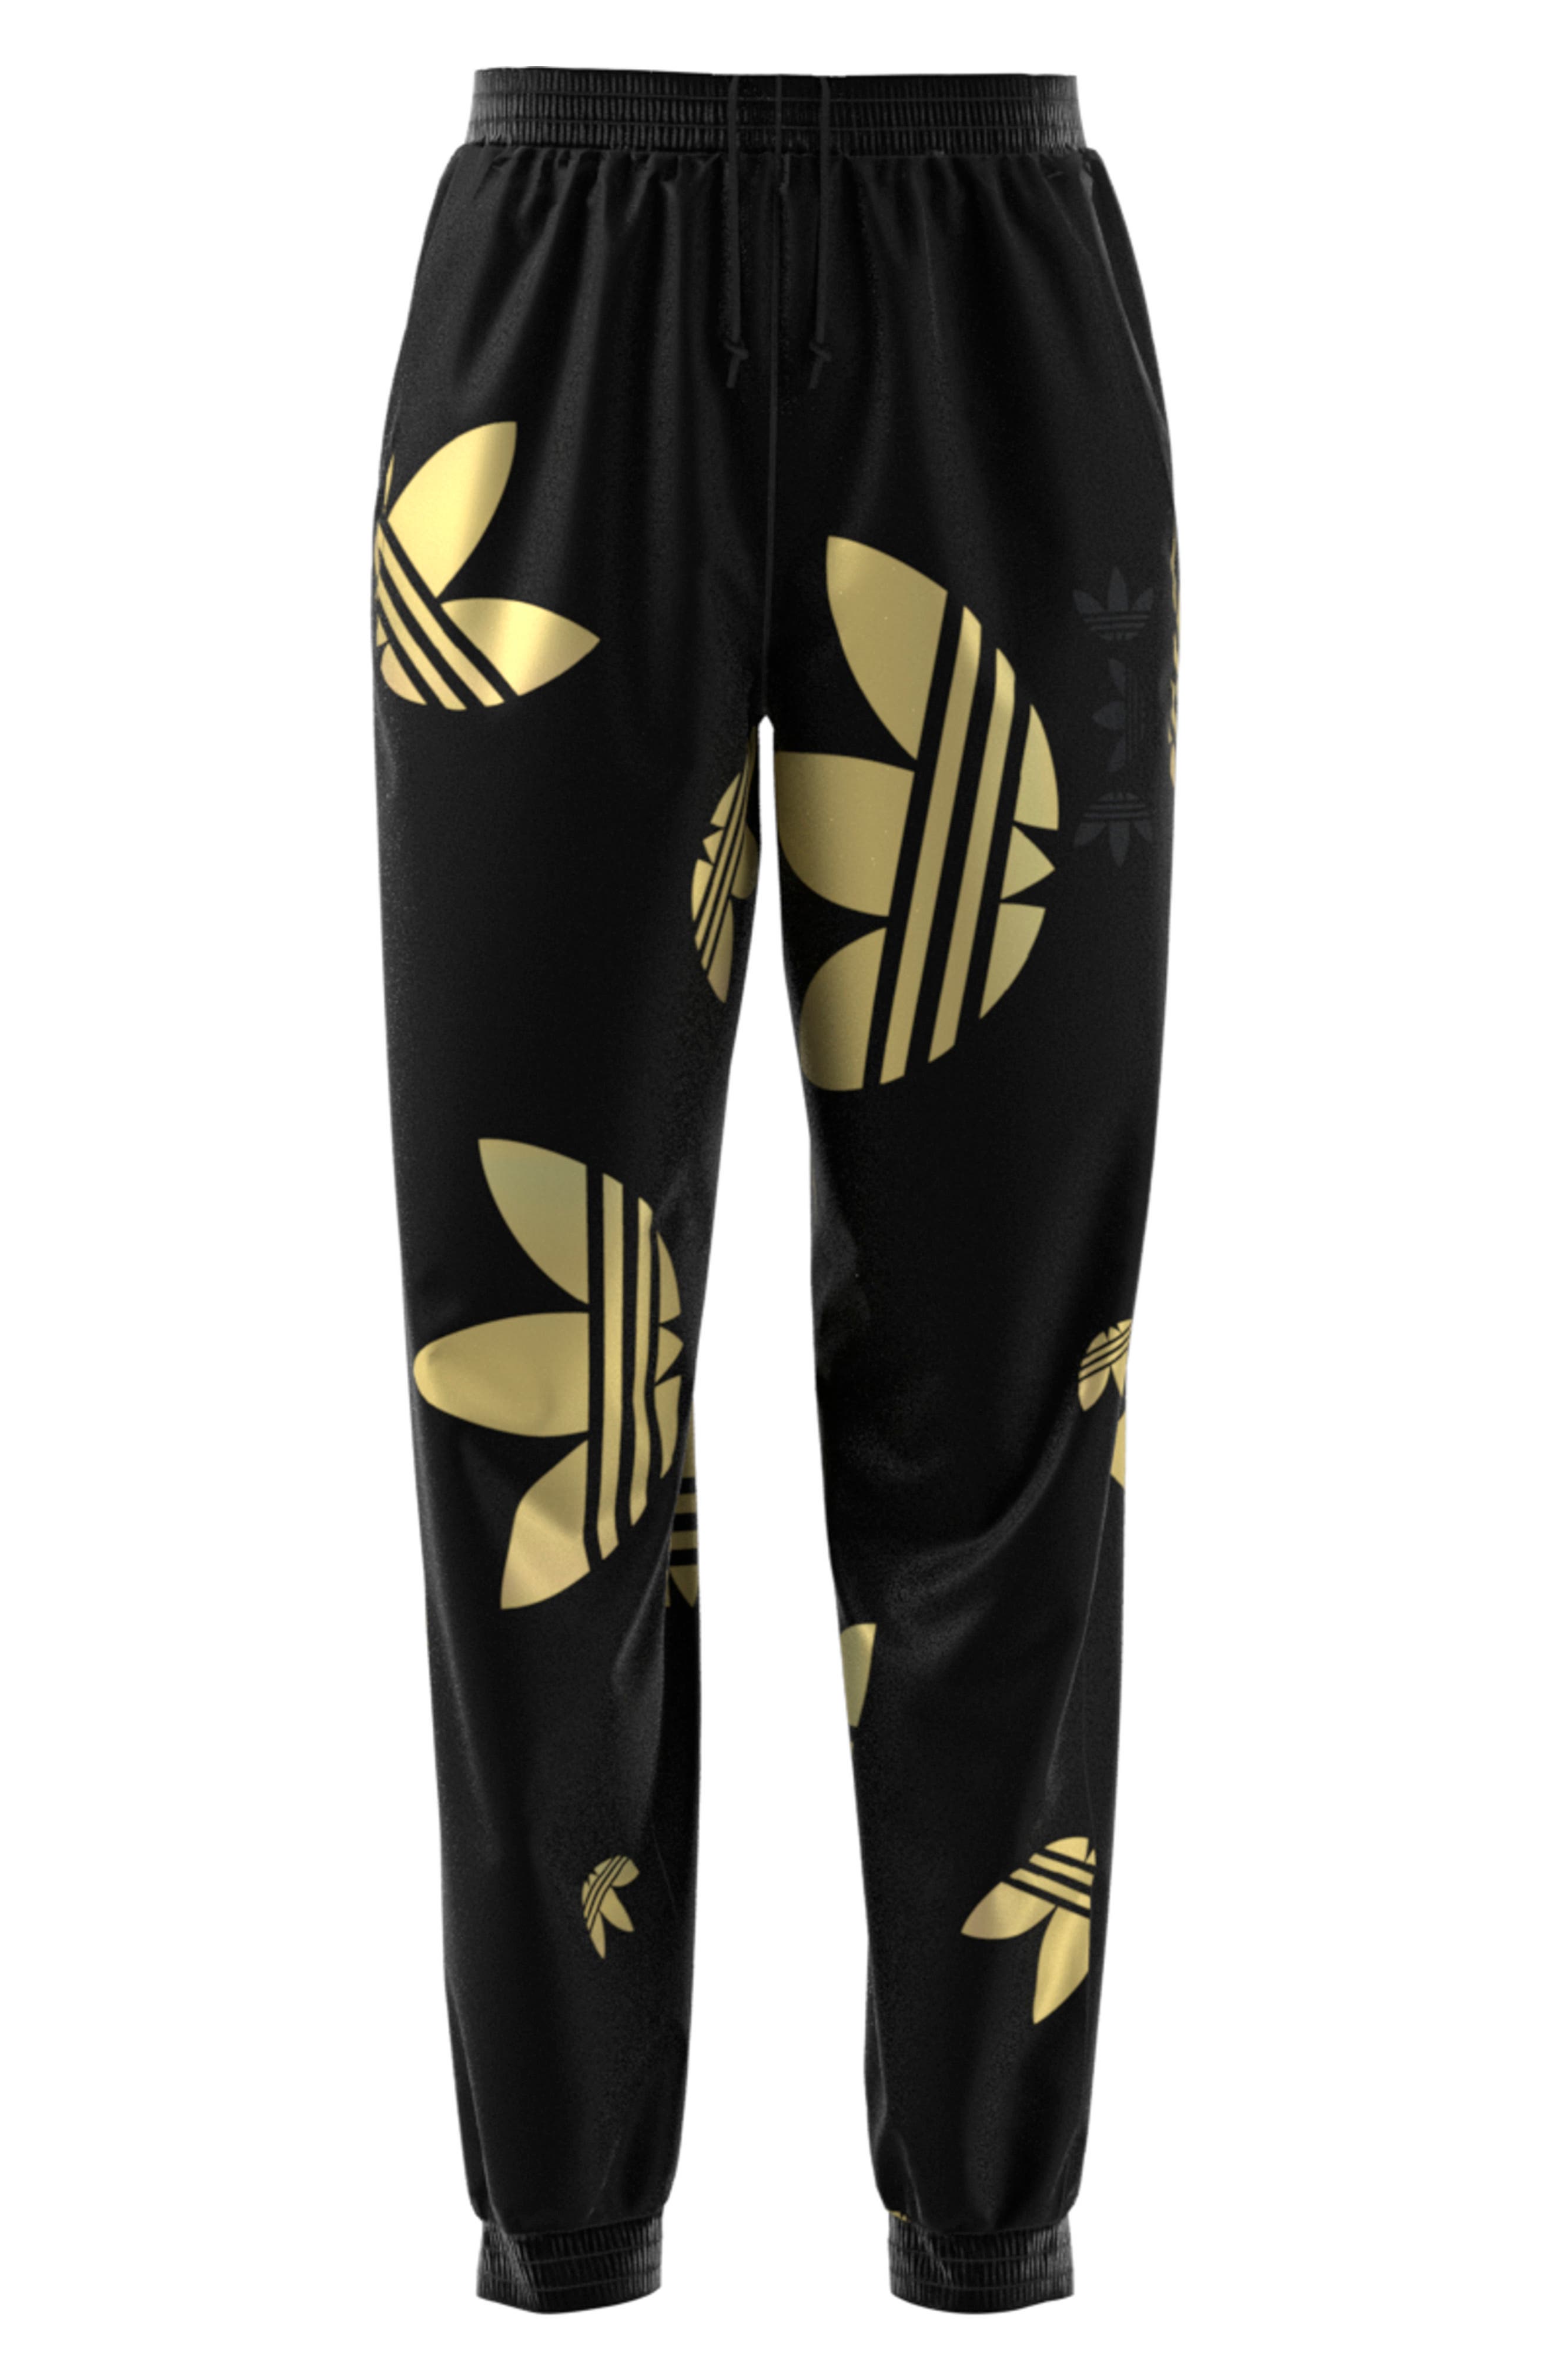 white and gold adidas sweatpants